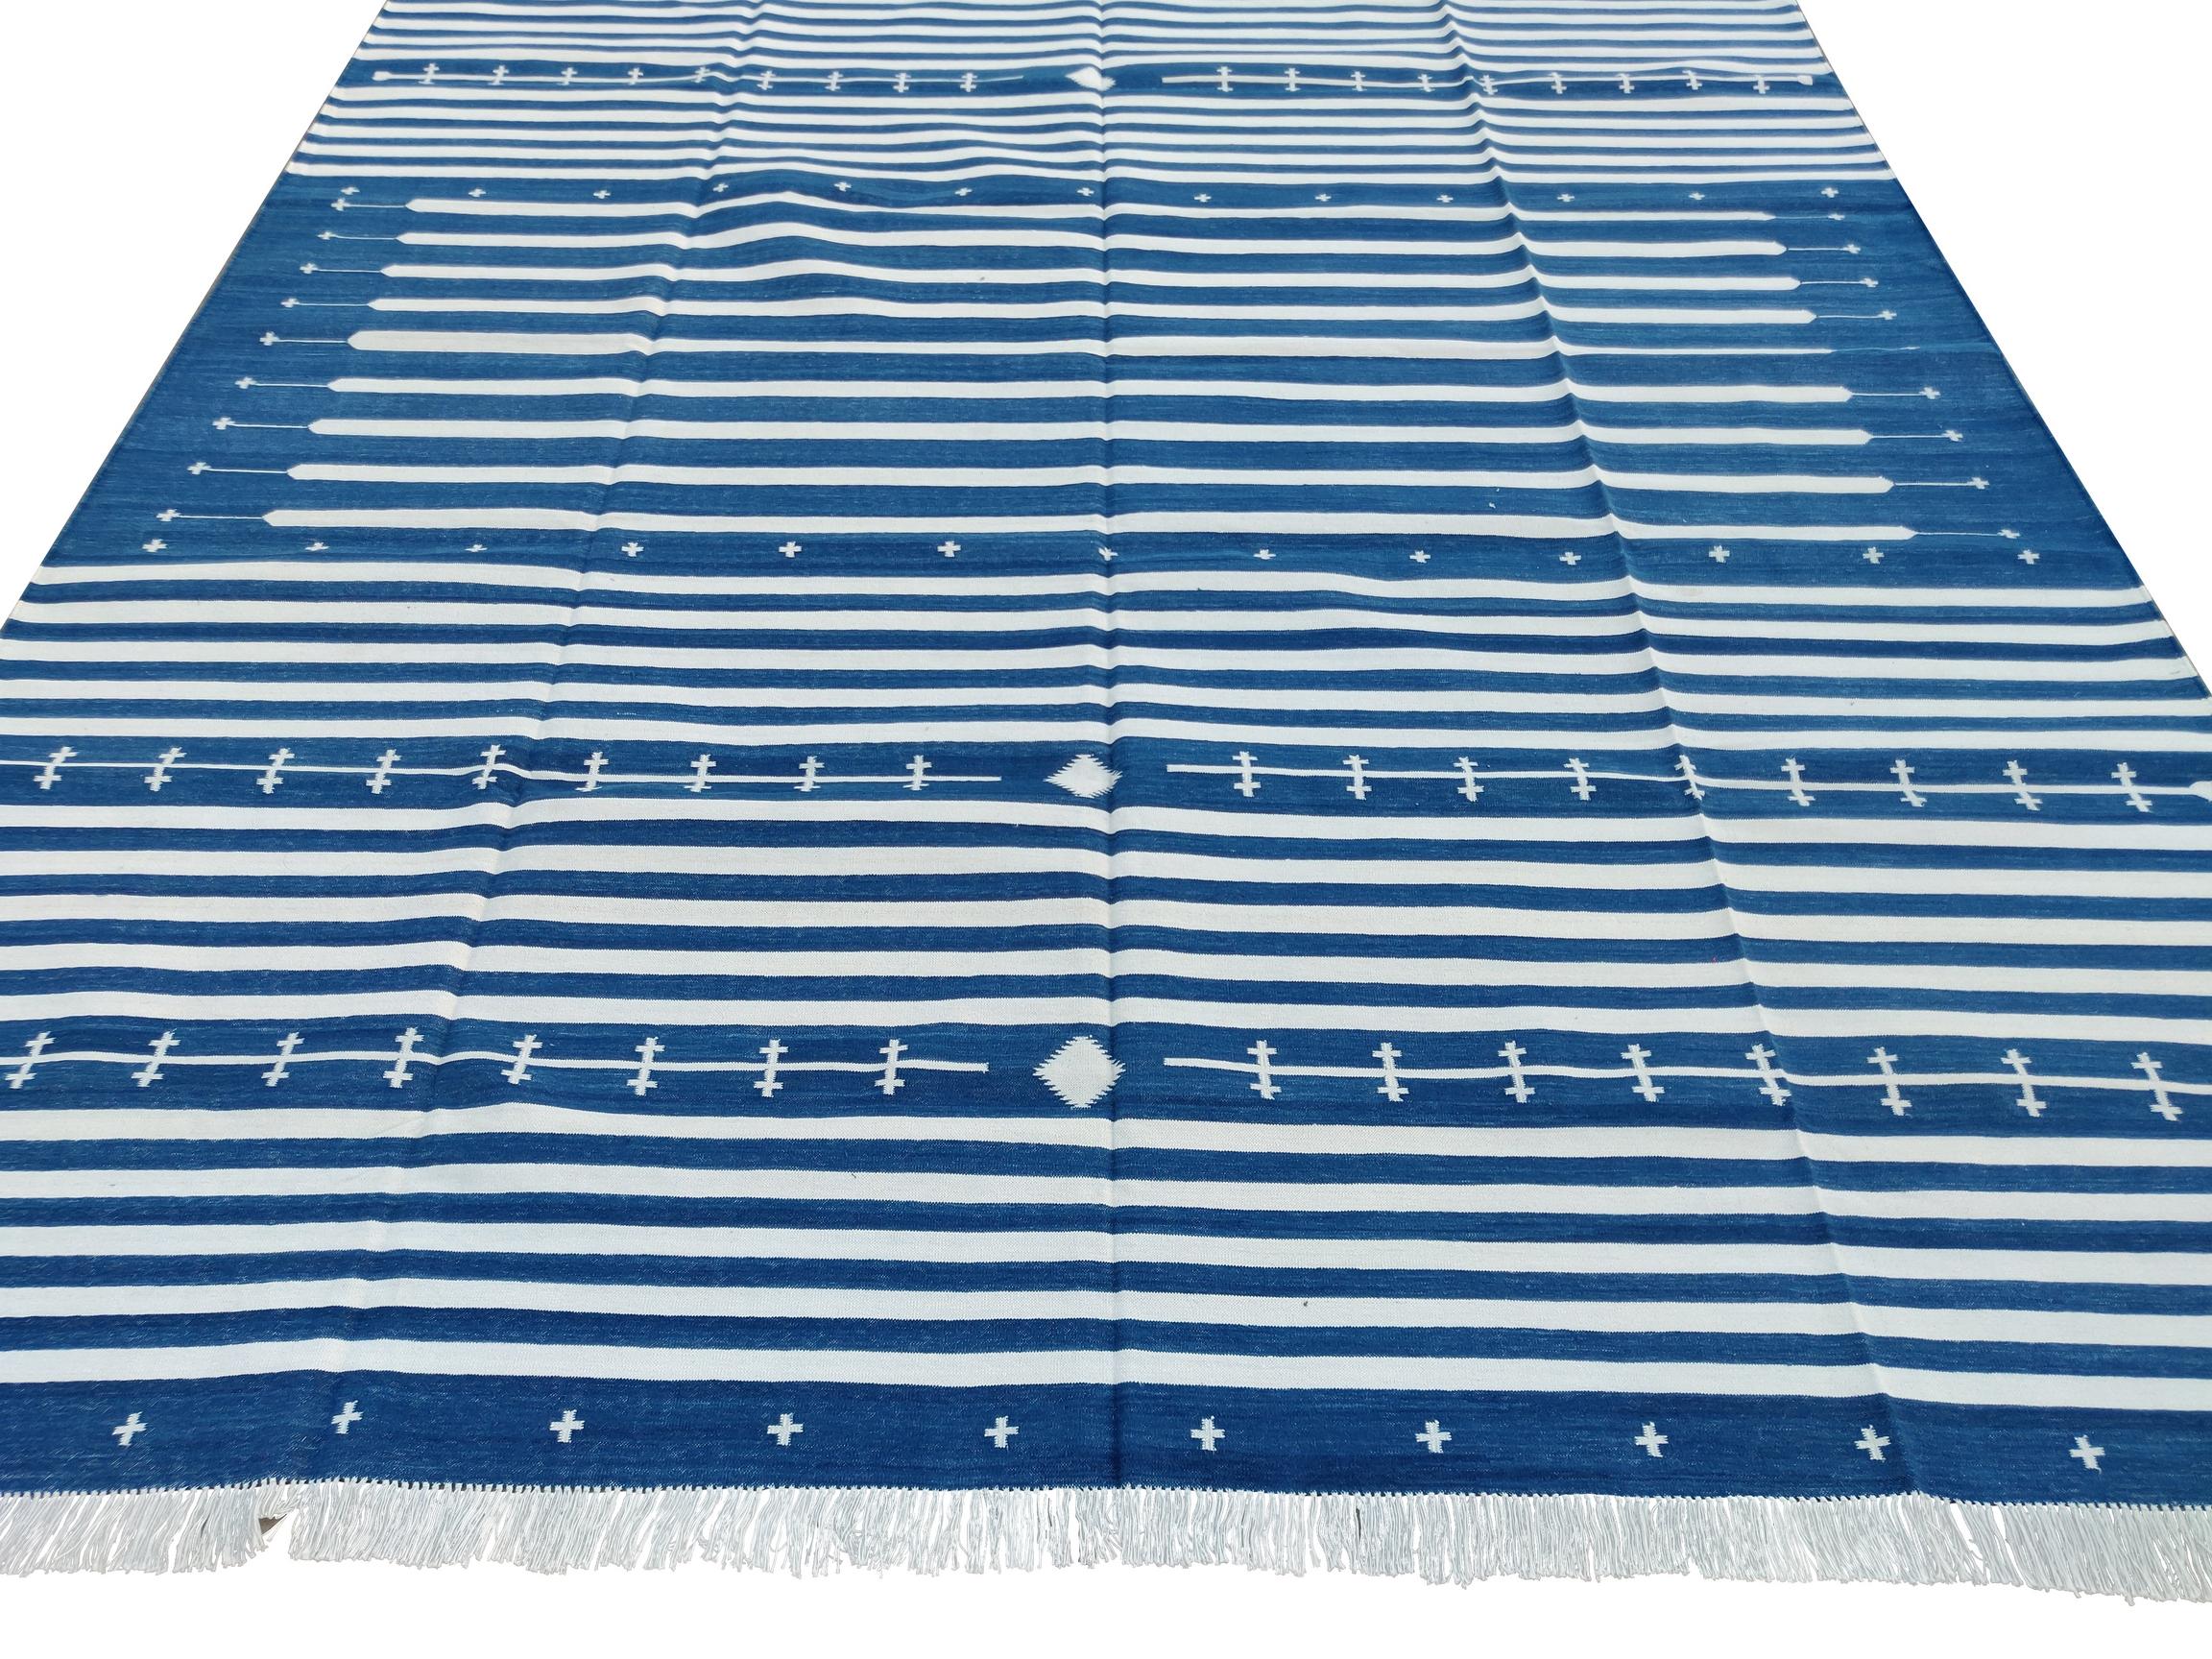 Handmade Cotton Area Flat Weave Rug, 8x10 Blue And White Striped Indian Dhurrie For Sale 1